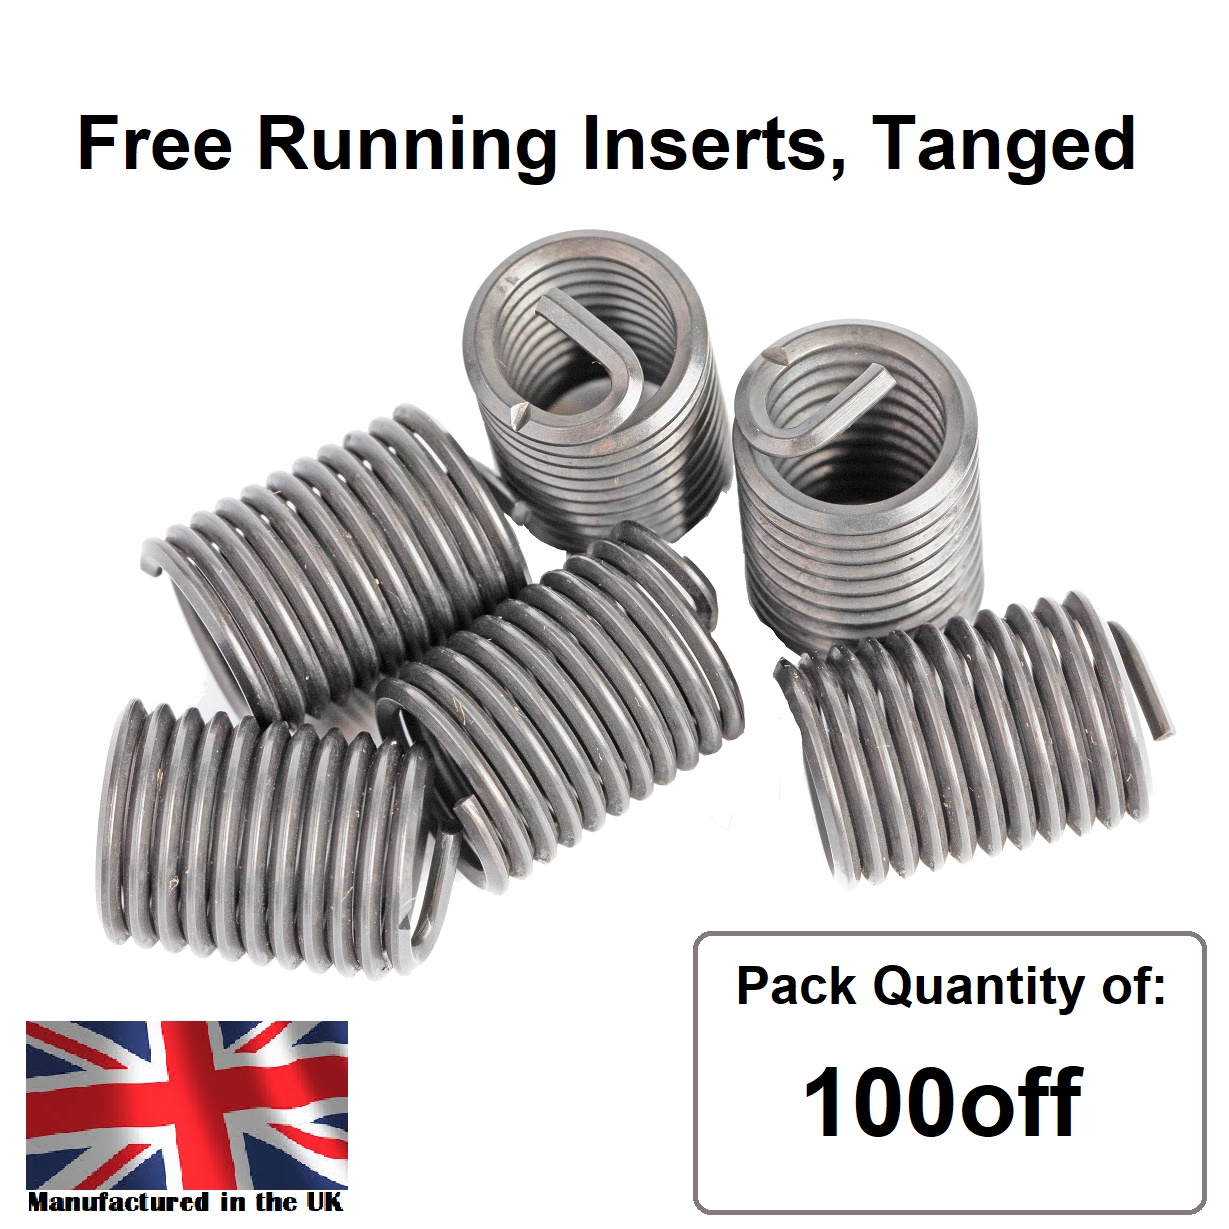 M5 x 0.8 x 1D Metric Coarse, Free Running, Tanged, Wire Thread Repair Insert, 304/A2 Stainless (Pack 100)